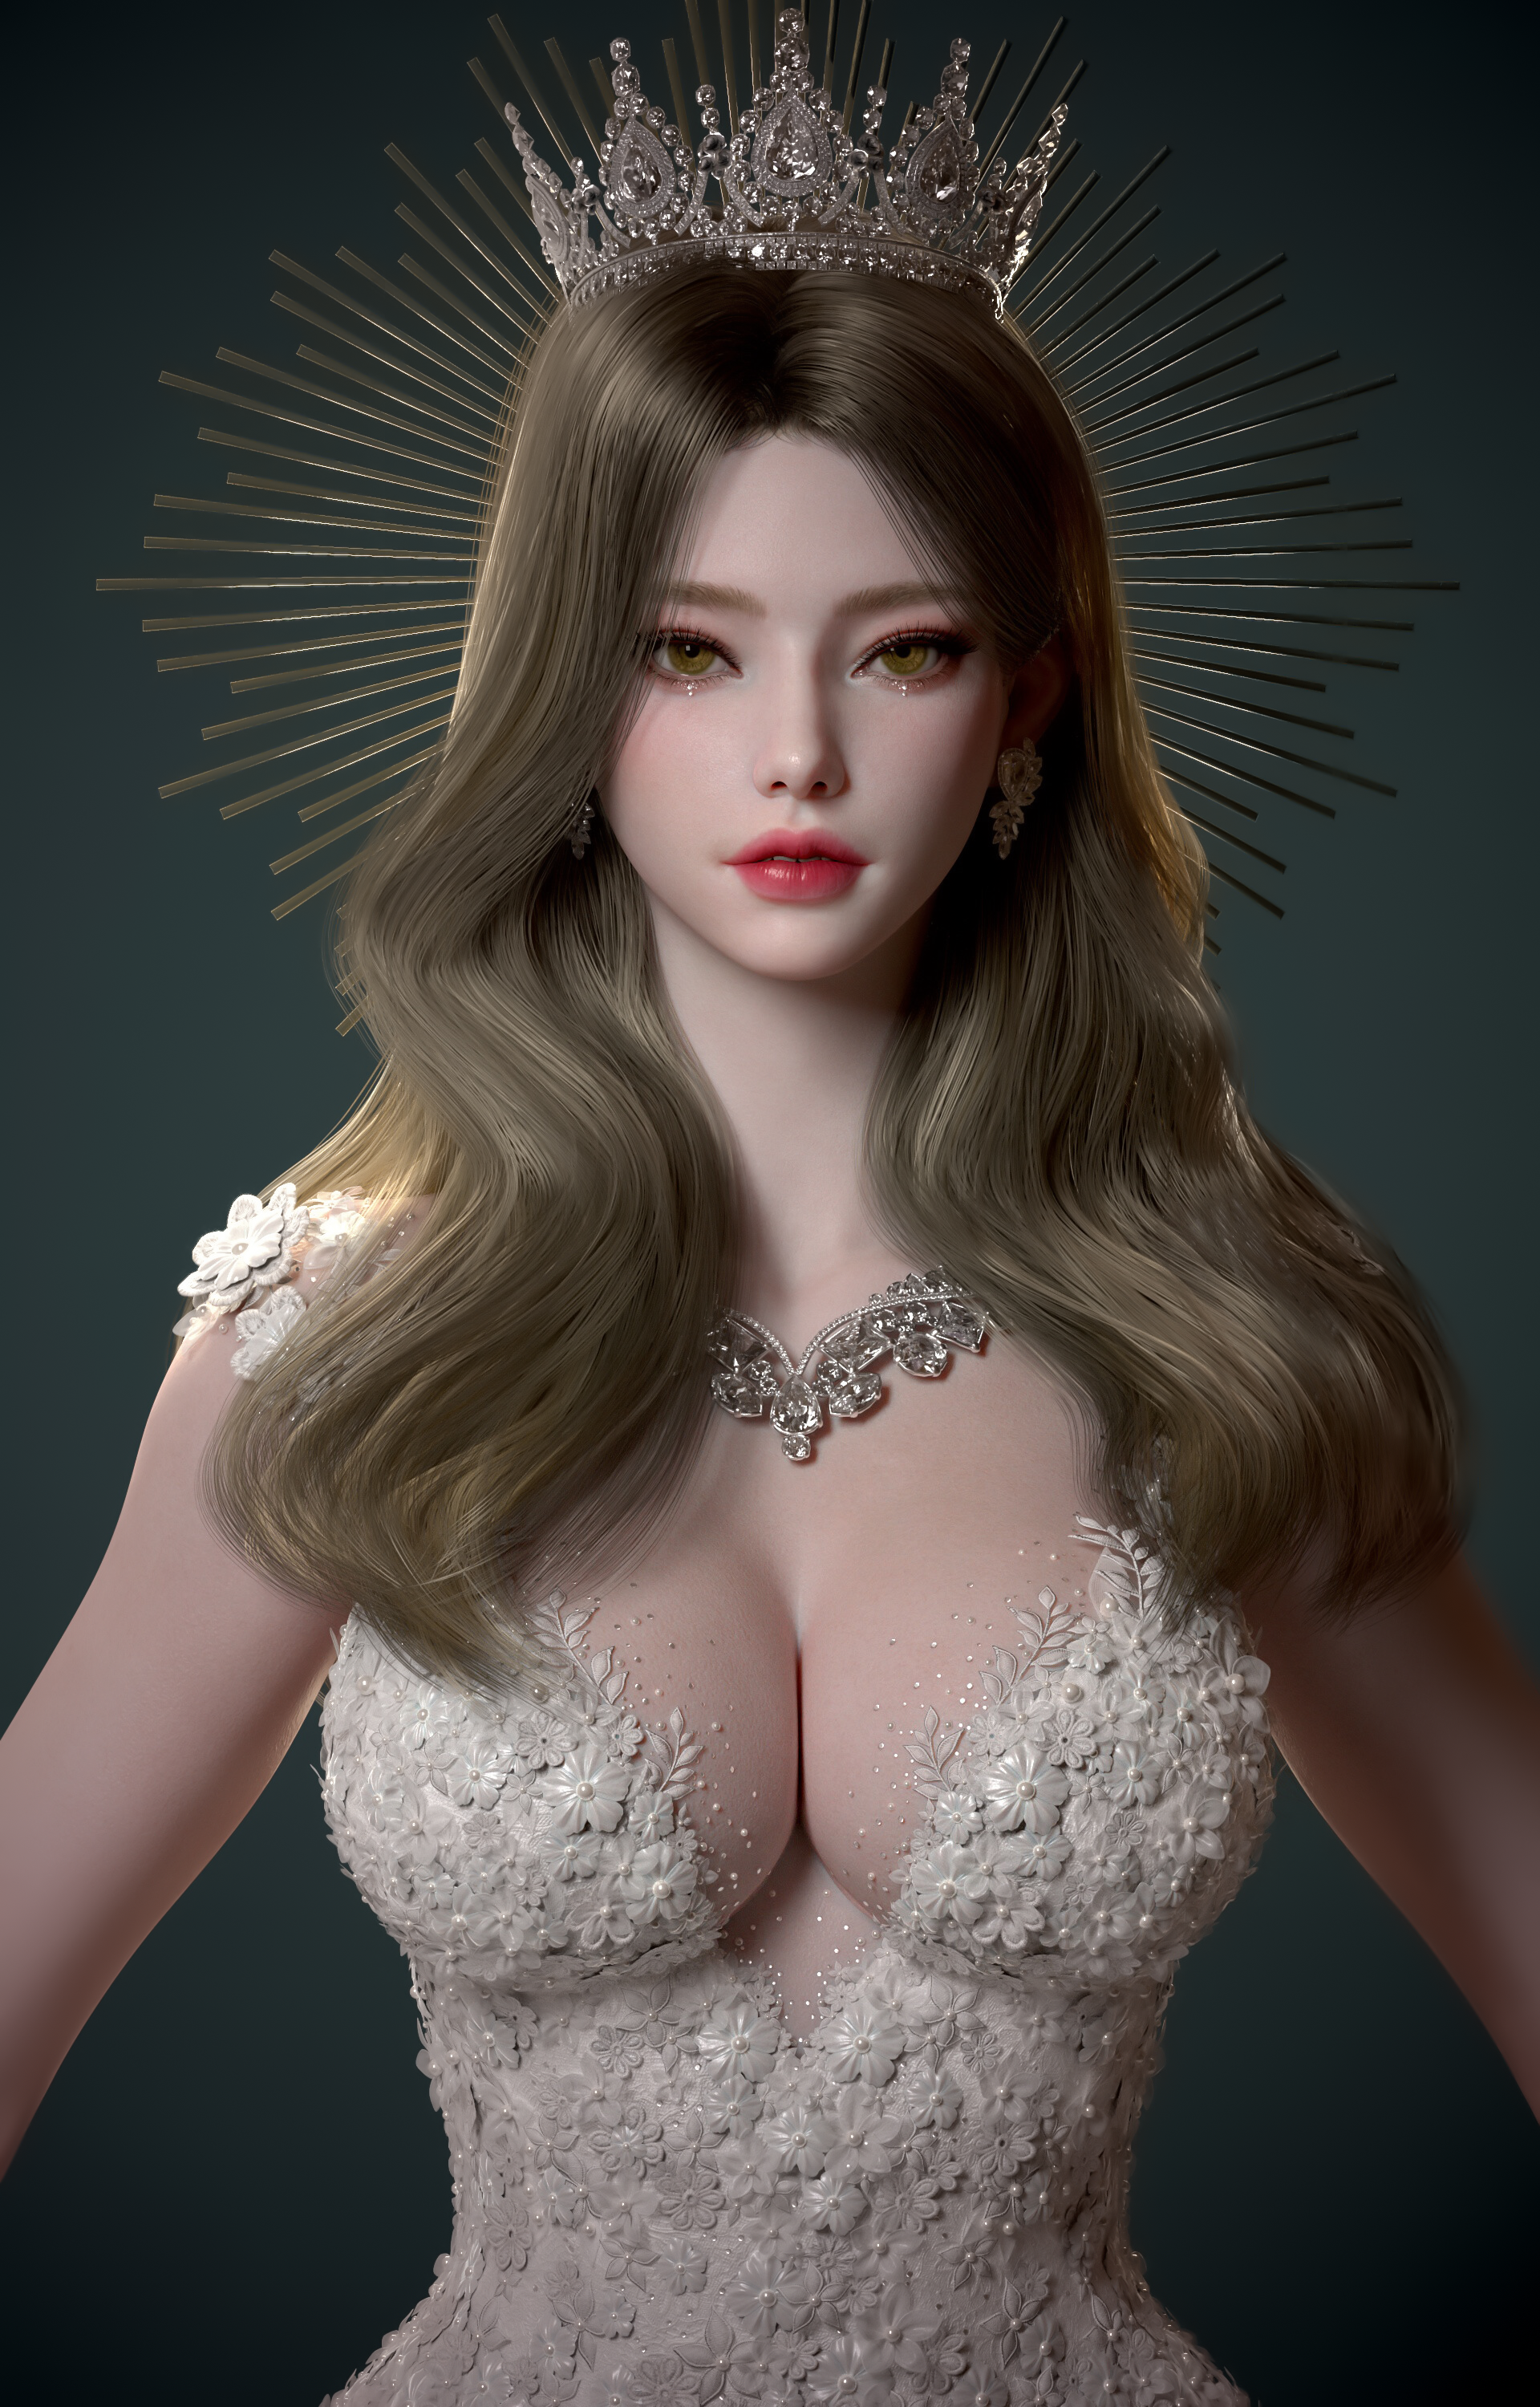 Su Jung CGi Women Brunette Crown Long Hair Makeup Wavy Hair Jewelry Necklace Dress White Clothing Si 1920x3000